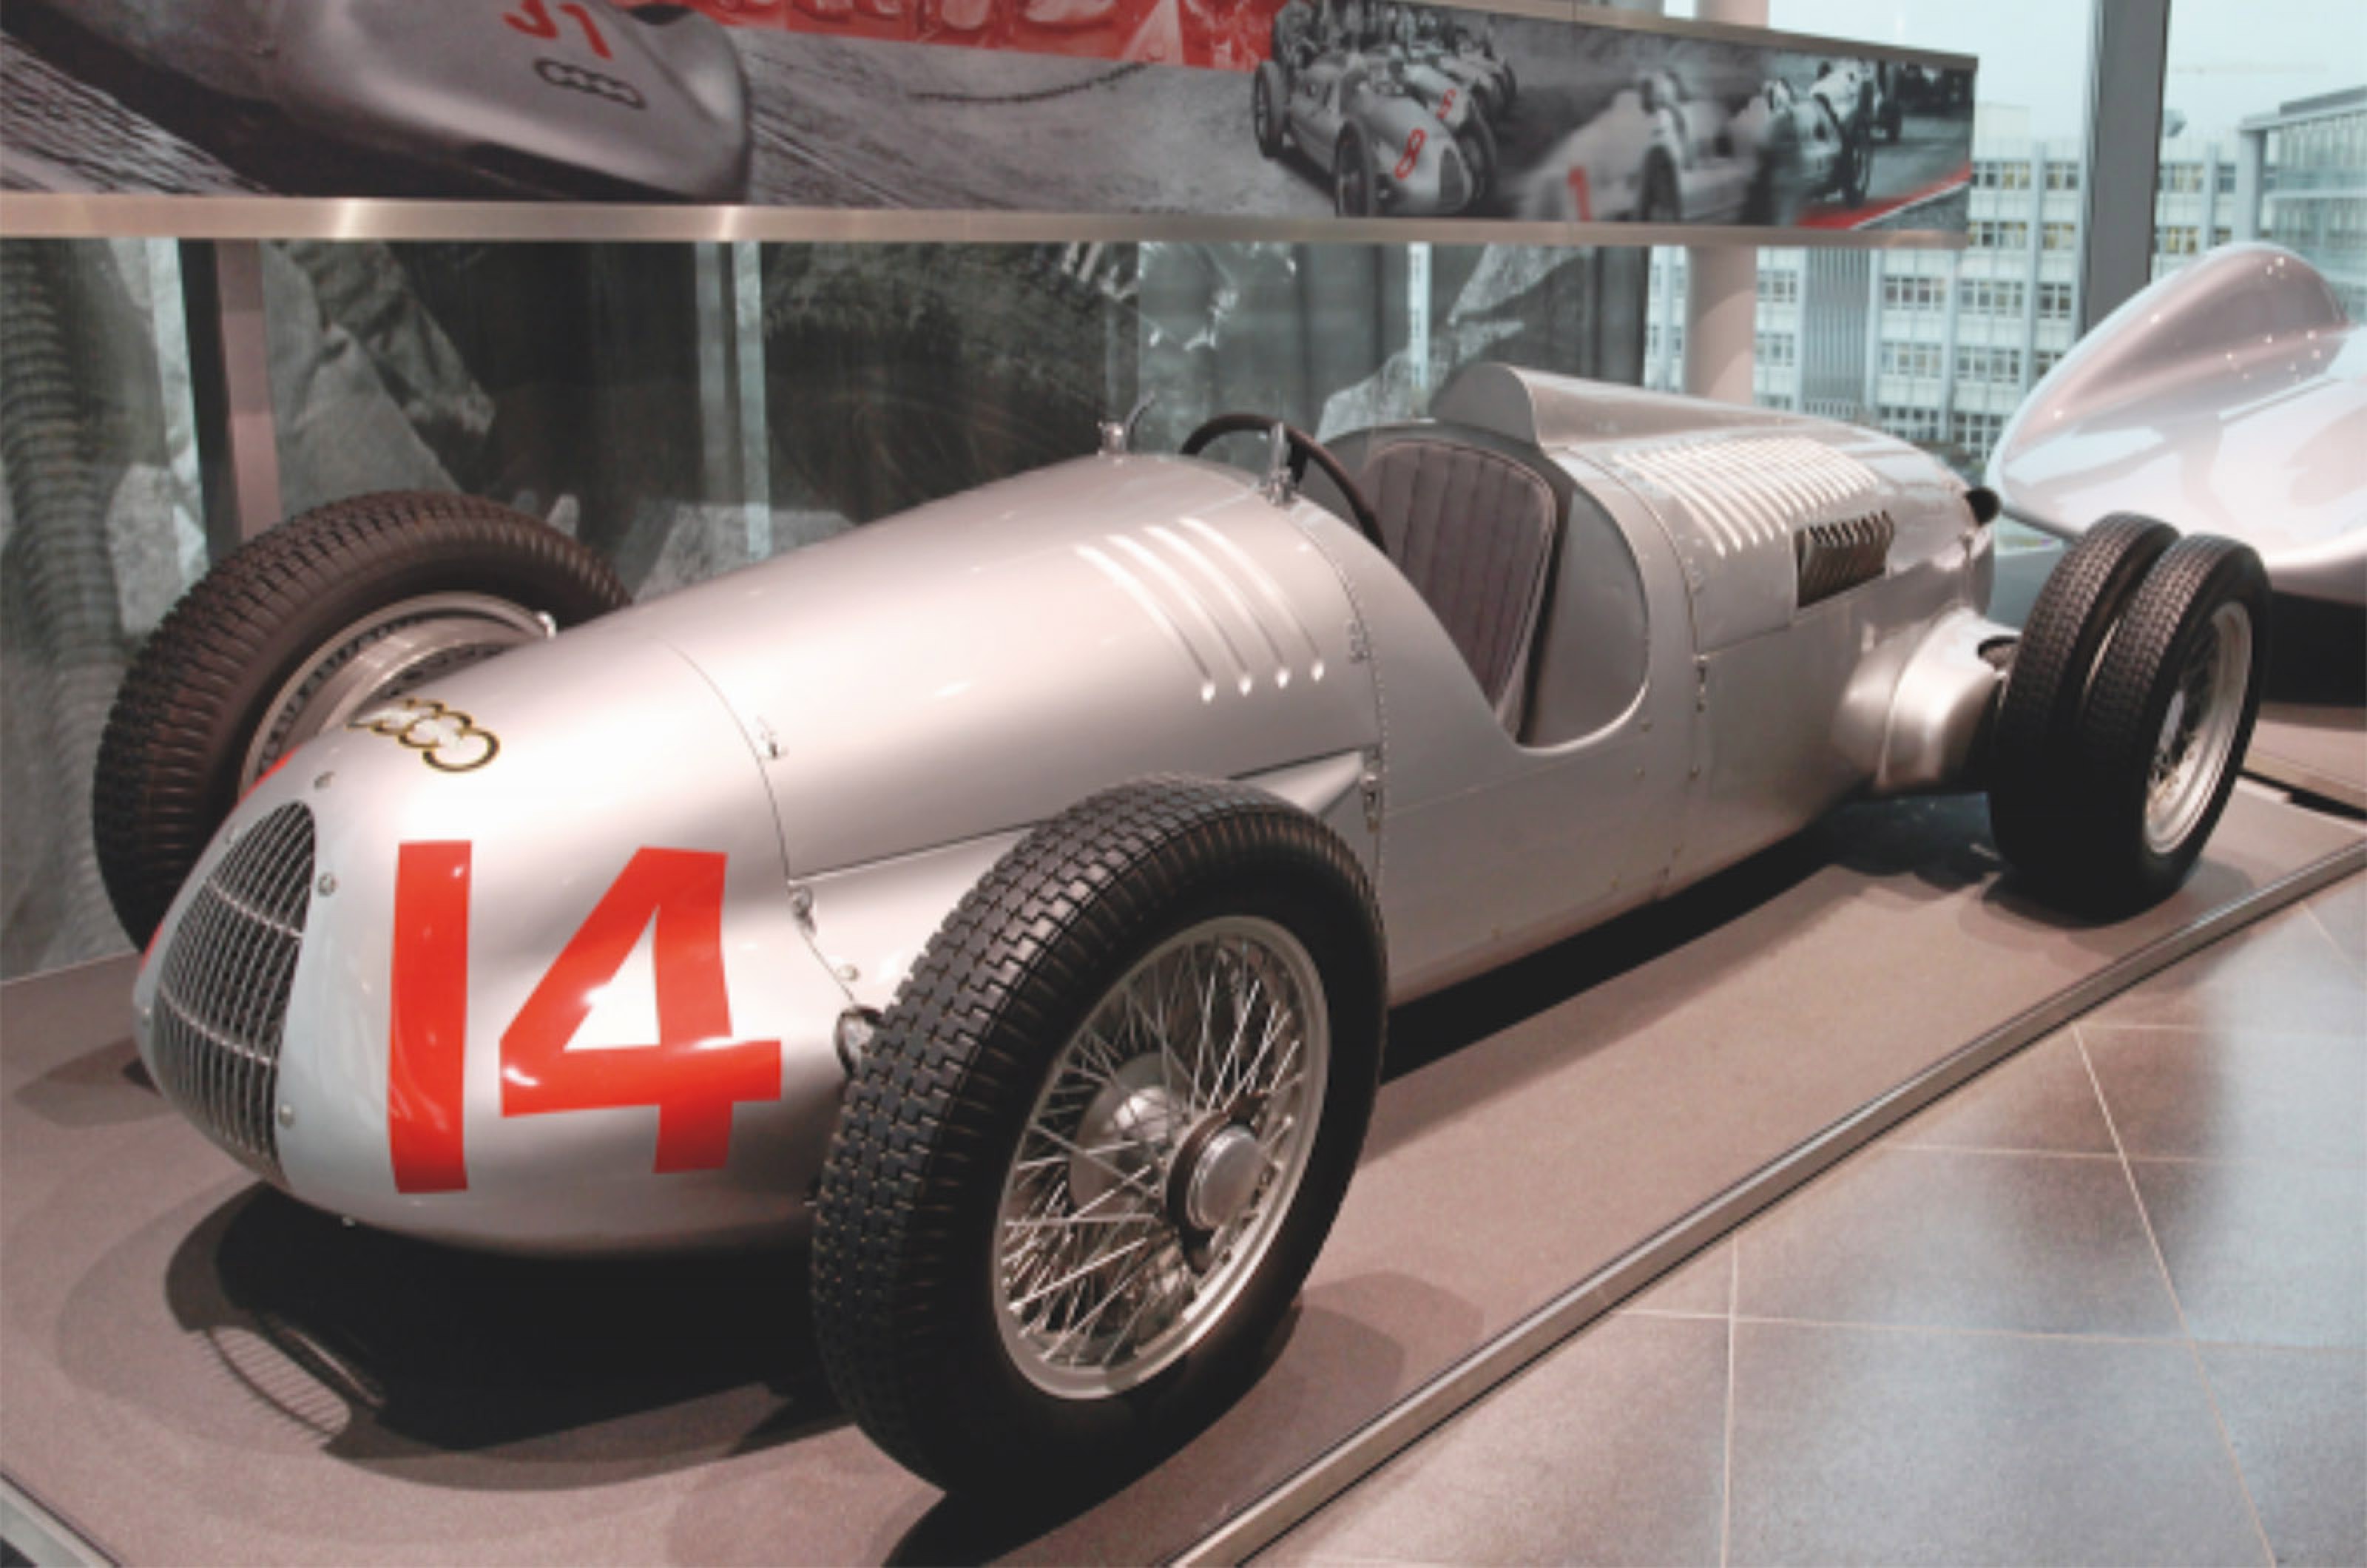 <p>The product of a state-sponsored race programme, Auto Union’s mid-engined, 16-cylinder Grand Prix car was developed by none other than Ferdinand Porsche.</p>  <p>The Auto Union evolved through four iterations – designated ‘A’ to ‘C’ – before the outbreak of war, with power of at least 295bhp from its 6-litre V16 engine. (A Type D with a supercharged V12 was the final version.)</p>  <p>Capable of up to 199mph when fitted with a streamlined body and enclosed cockpit, the Auto Union won numerous races in the European Championship.</p>